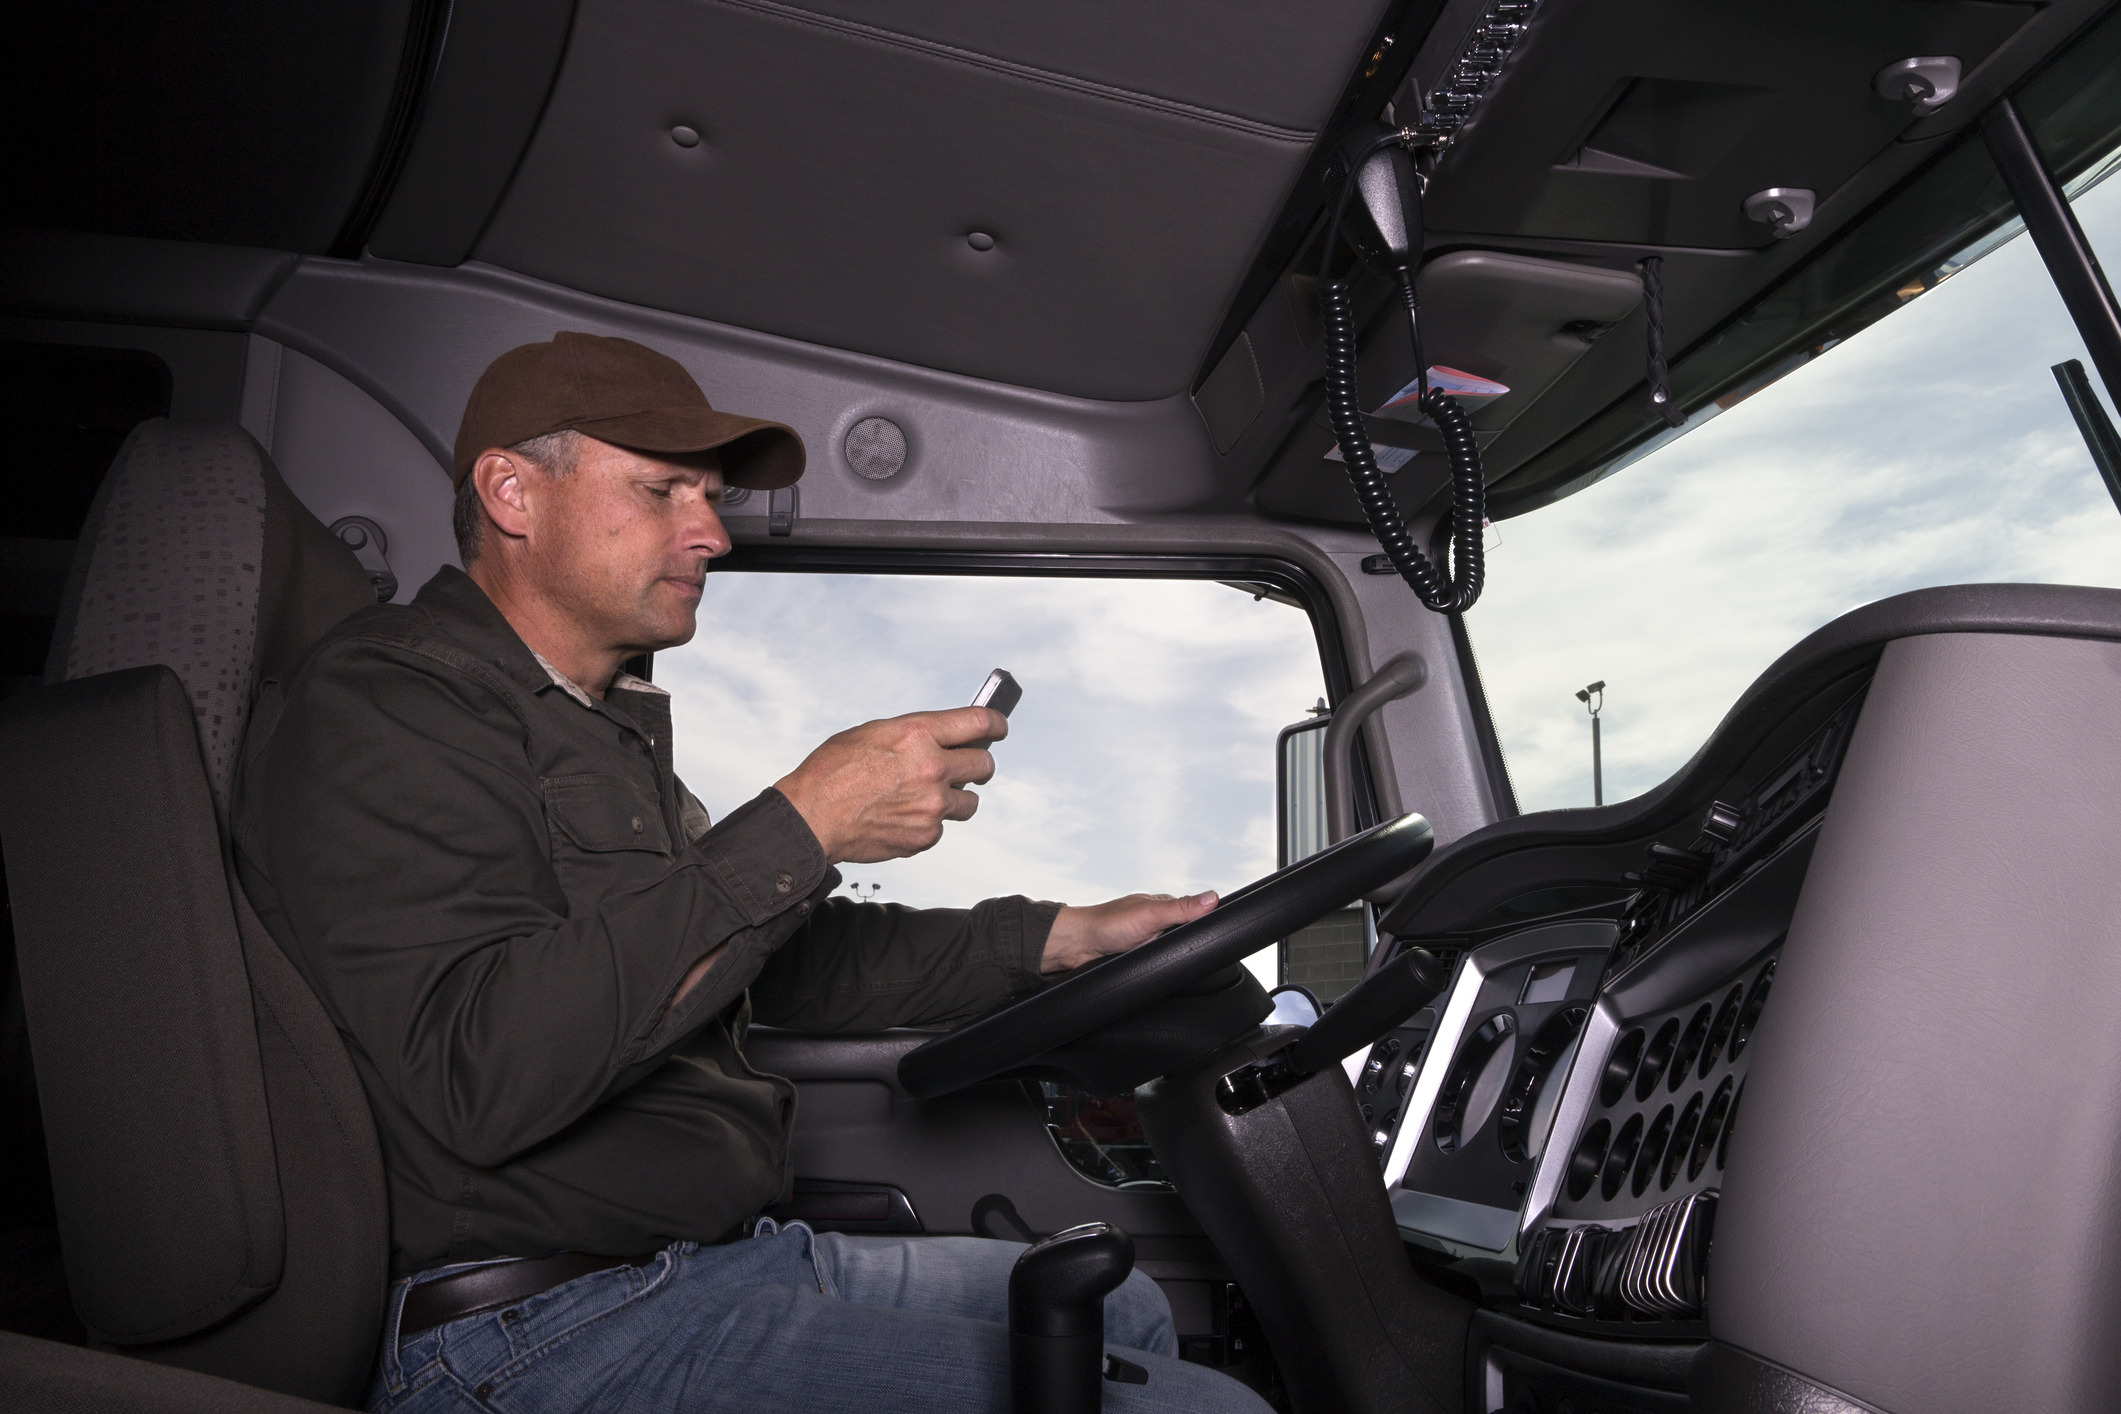 Truck driver texting while driving